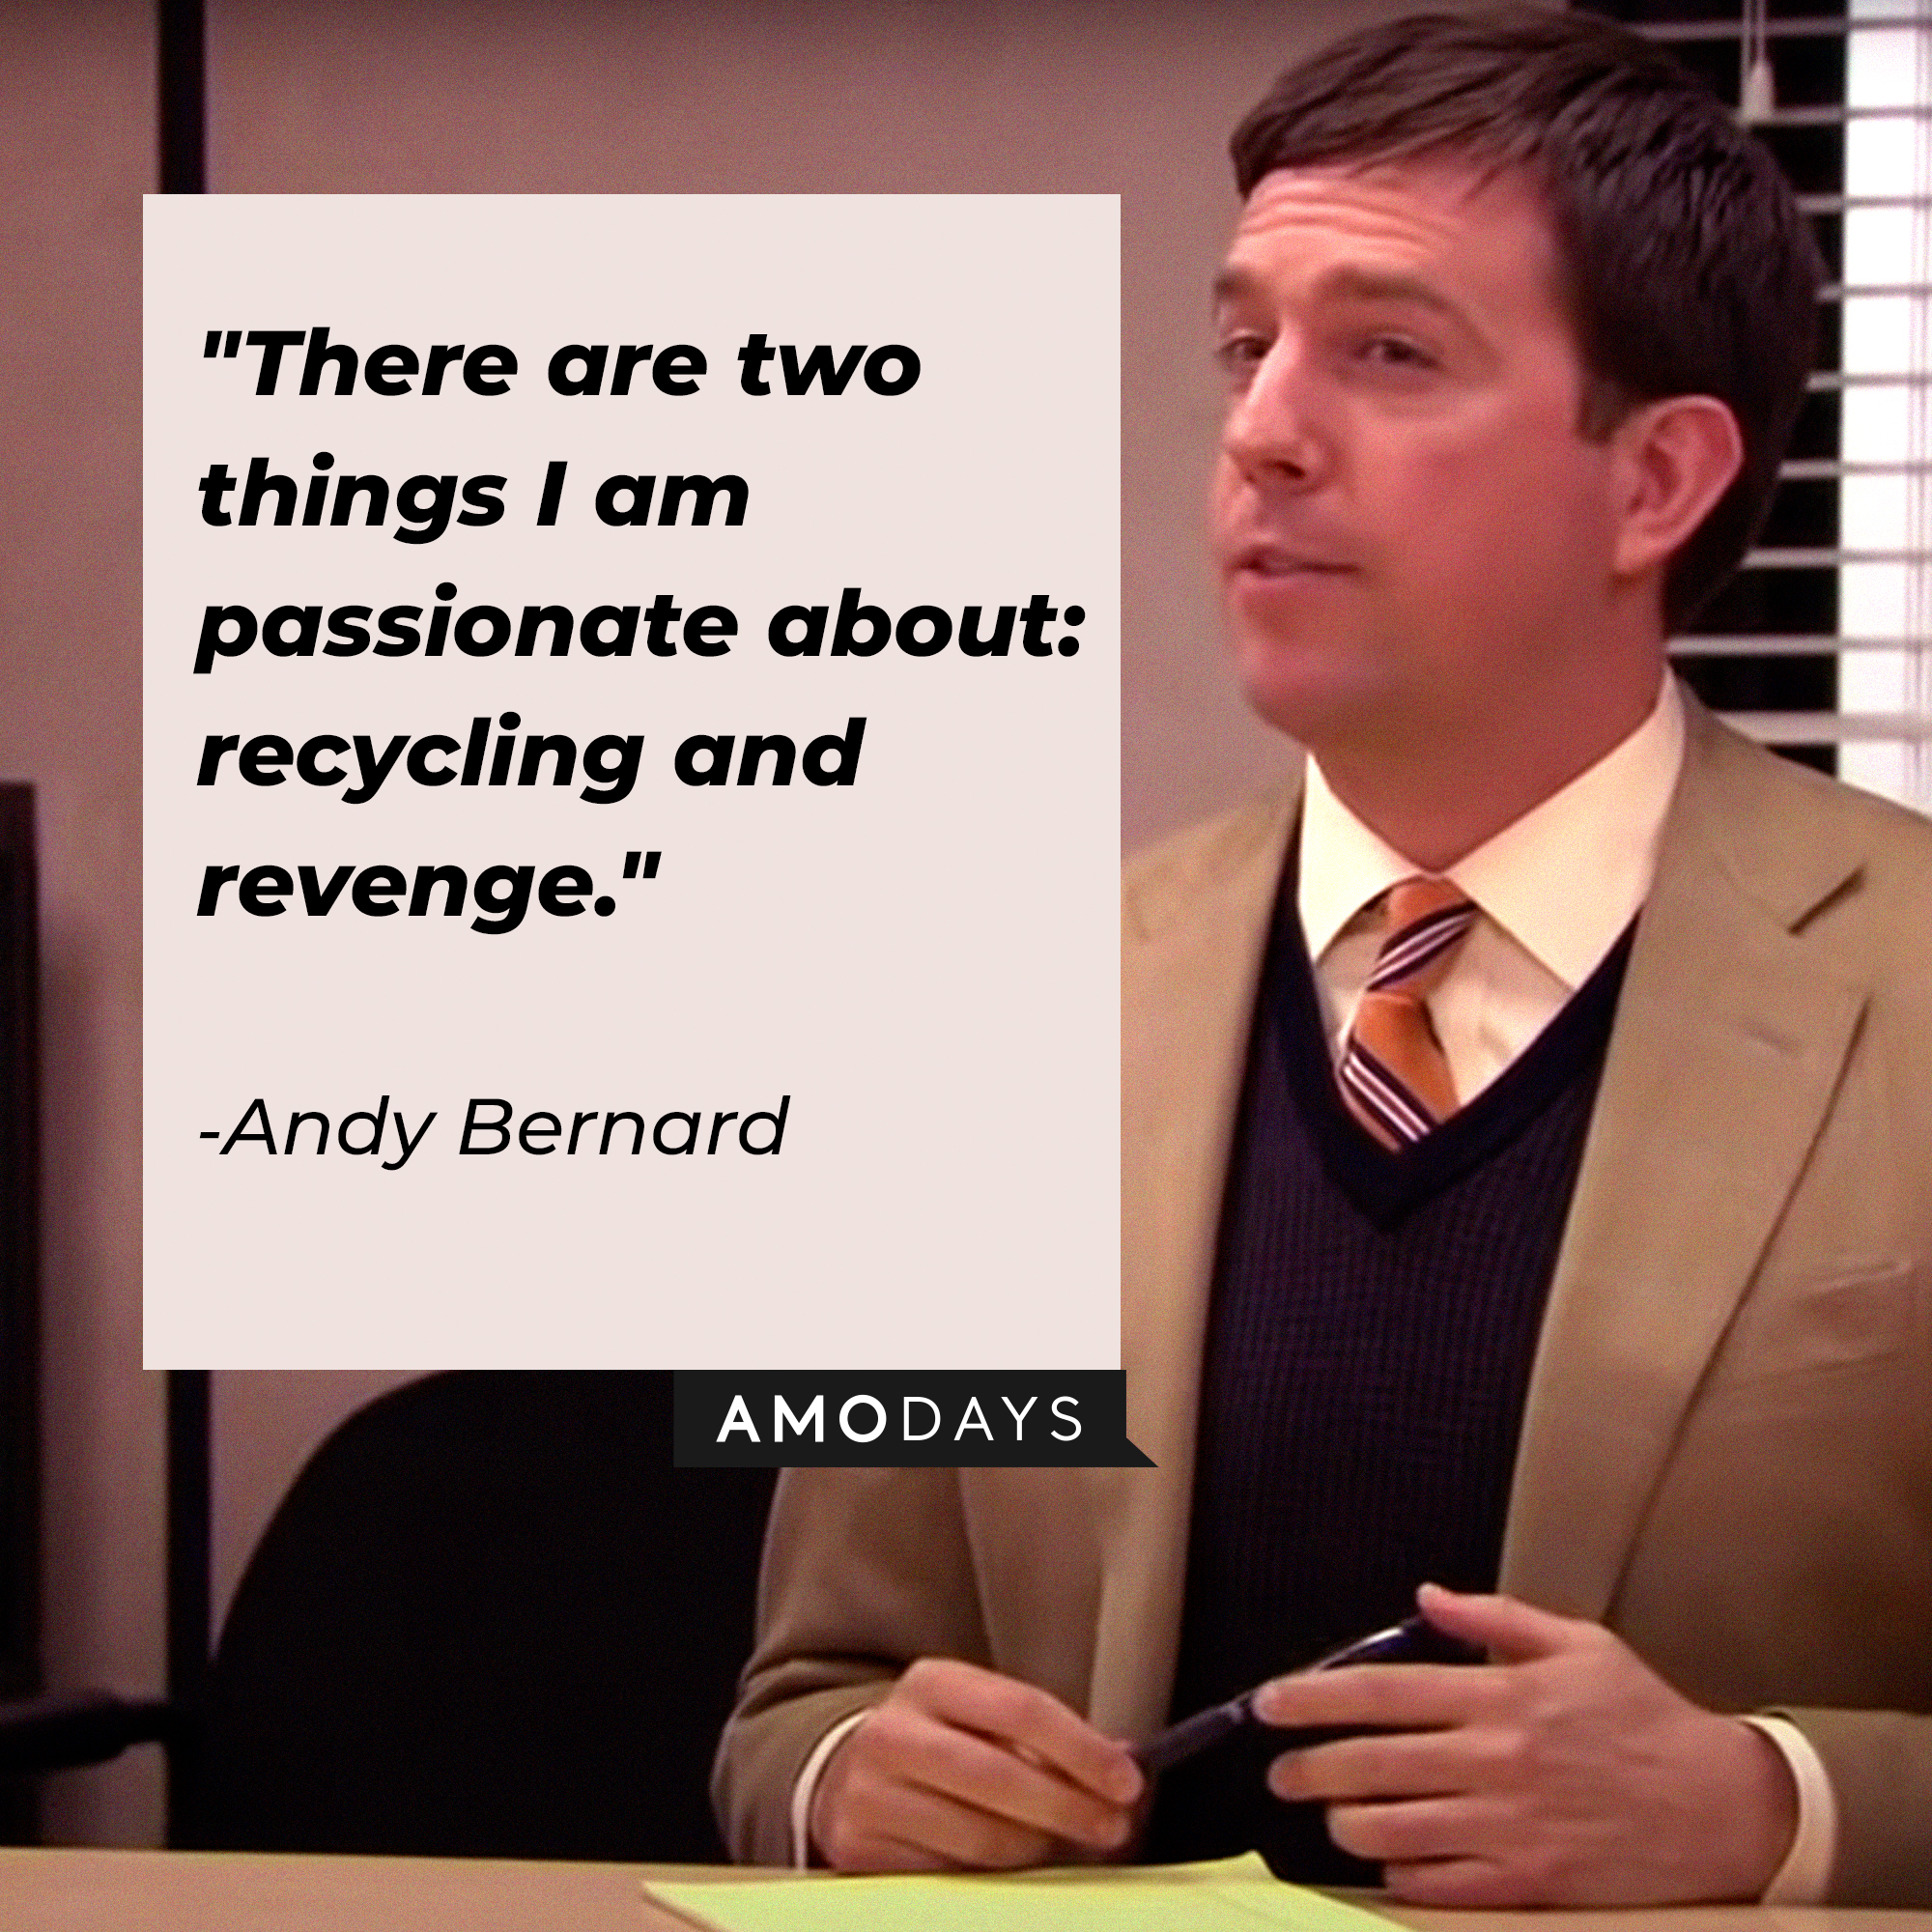 Andy Bernard, with his quote: “There are two things I am passionate about: recycling and revenge.”│ Source: youtube.com/TheOffice